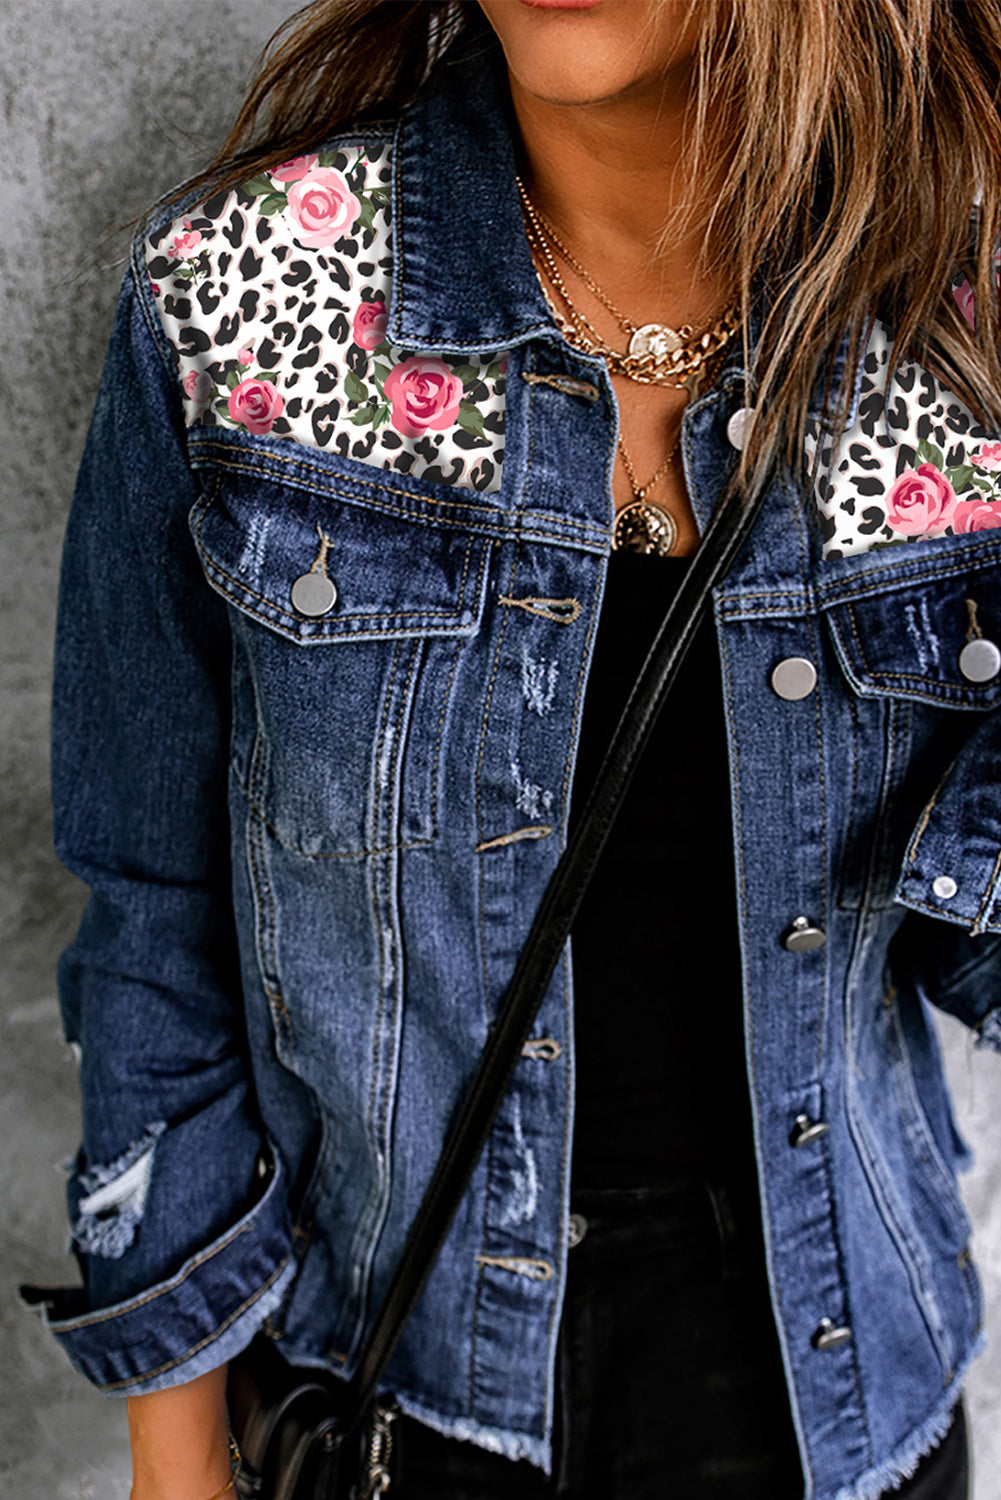 Denim Jacket with Mixed Print in Distressed Style for Women